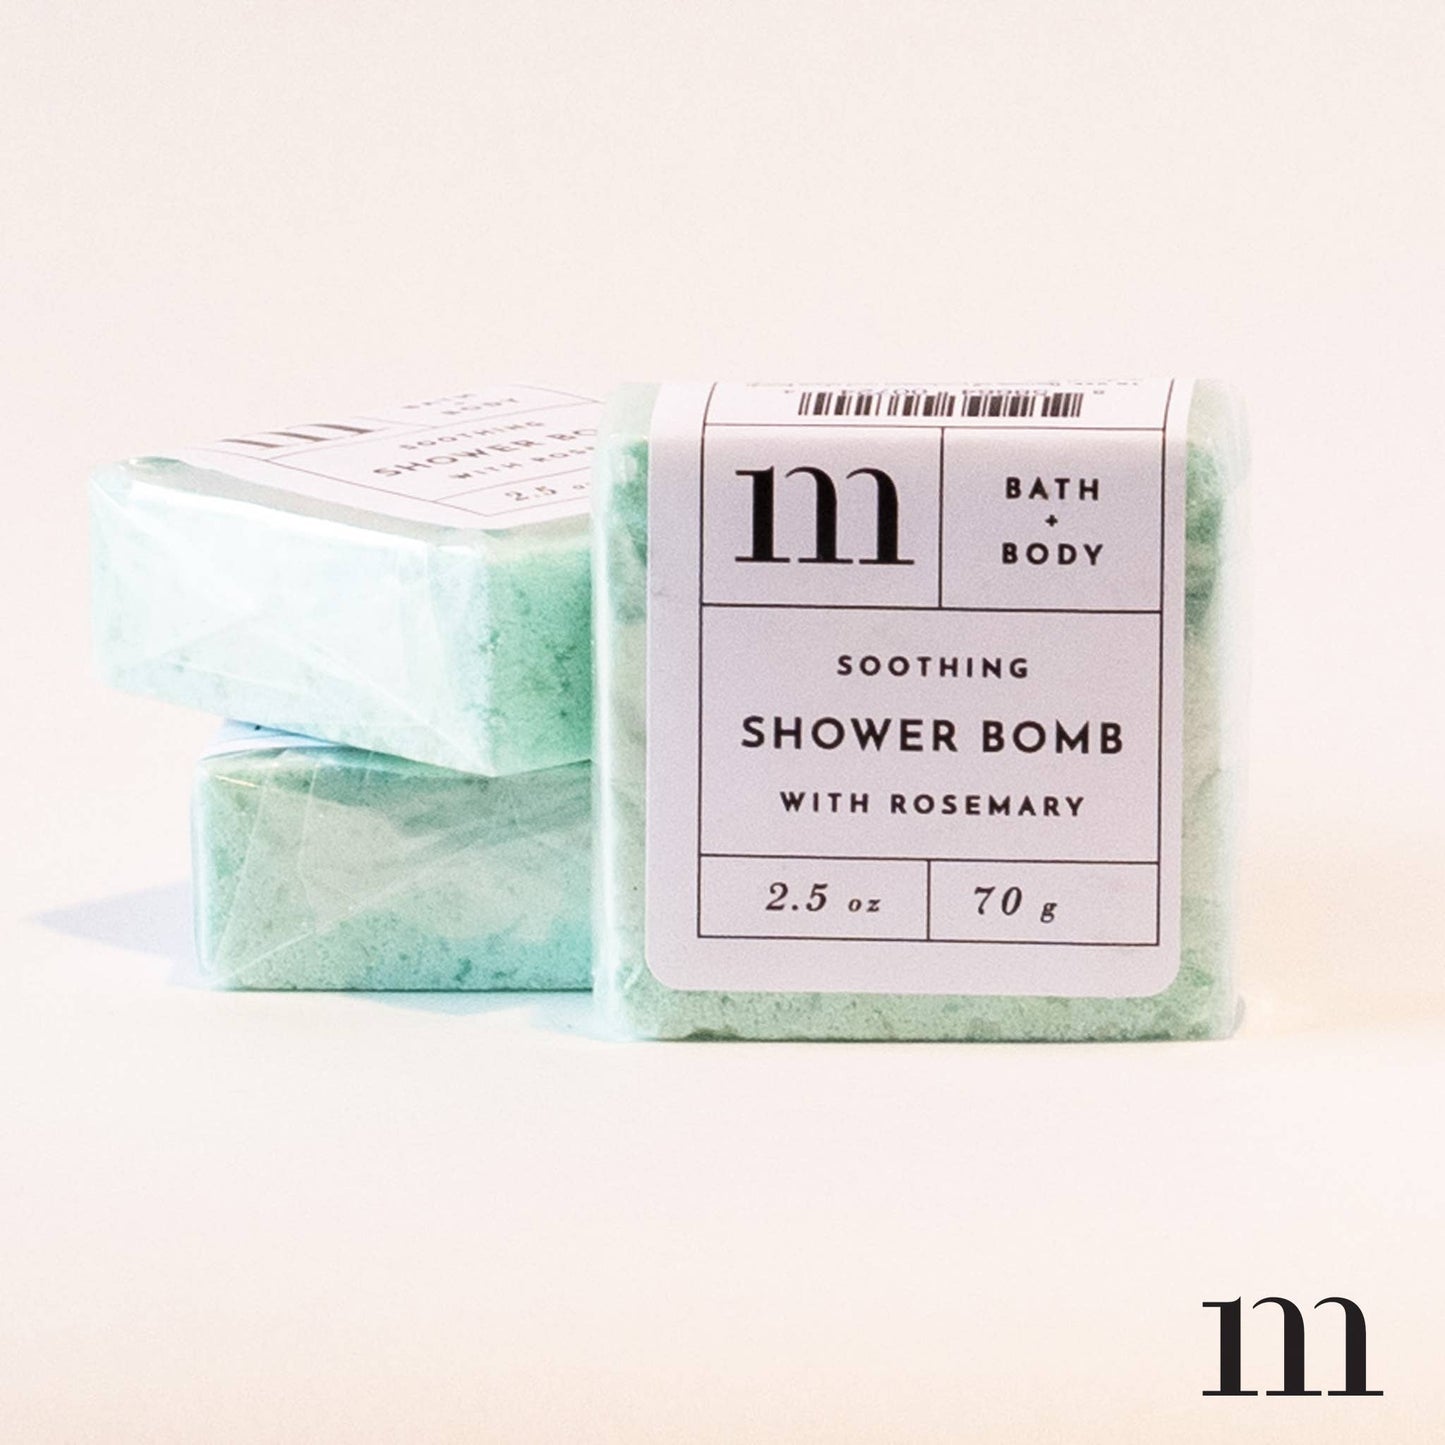 Soothing Shower Bomb